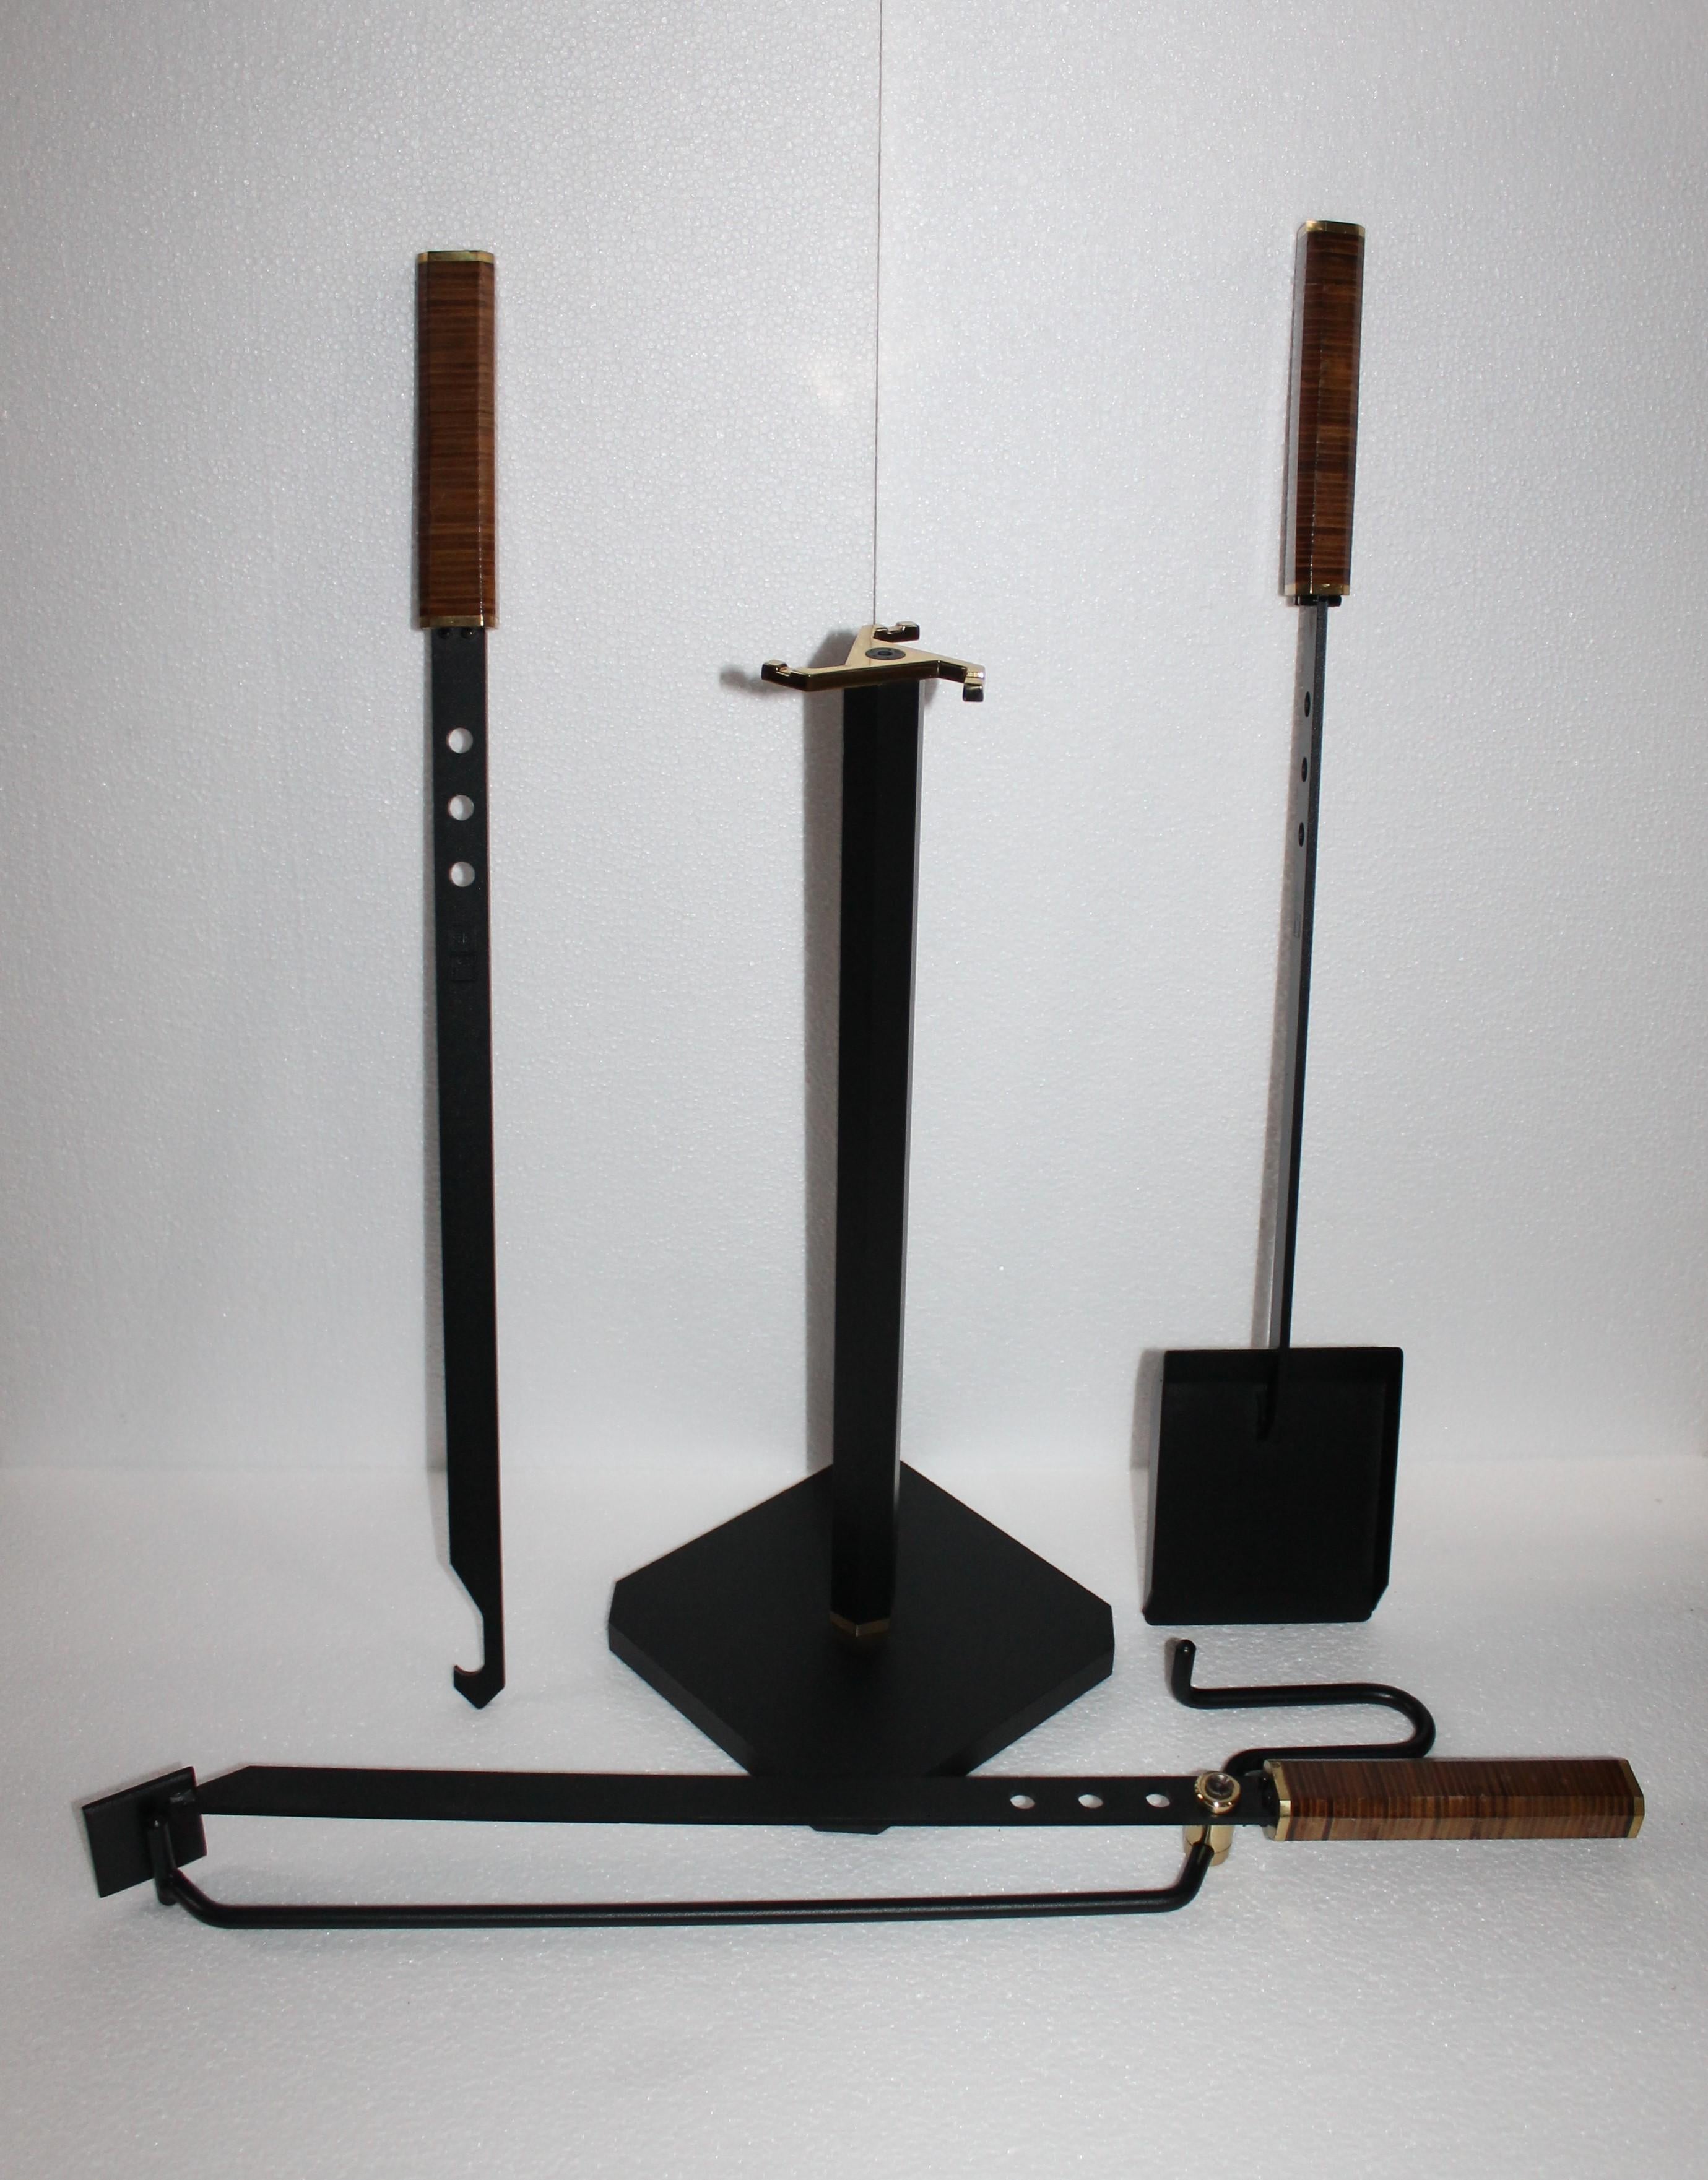 Incredible fireplace tools set by Tobia & Afra Scarpa for Dimensione Fuoco, 1983. Fireplace tools such as shovel, poker and tong in iron with brass details and rosewood handles. These Minimalist showpieces combine tradition, functionality and